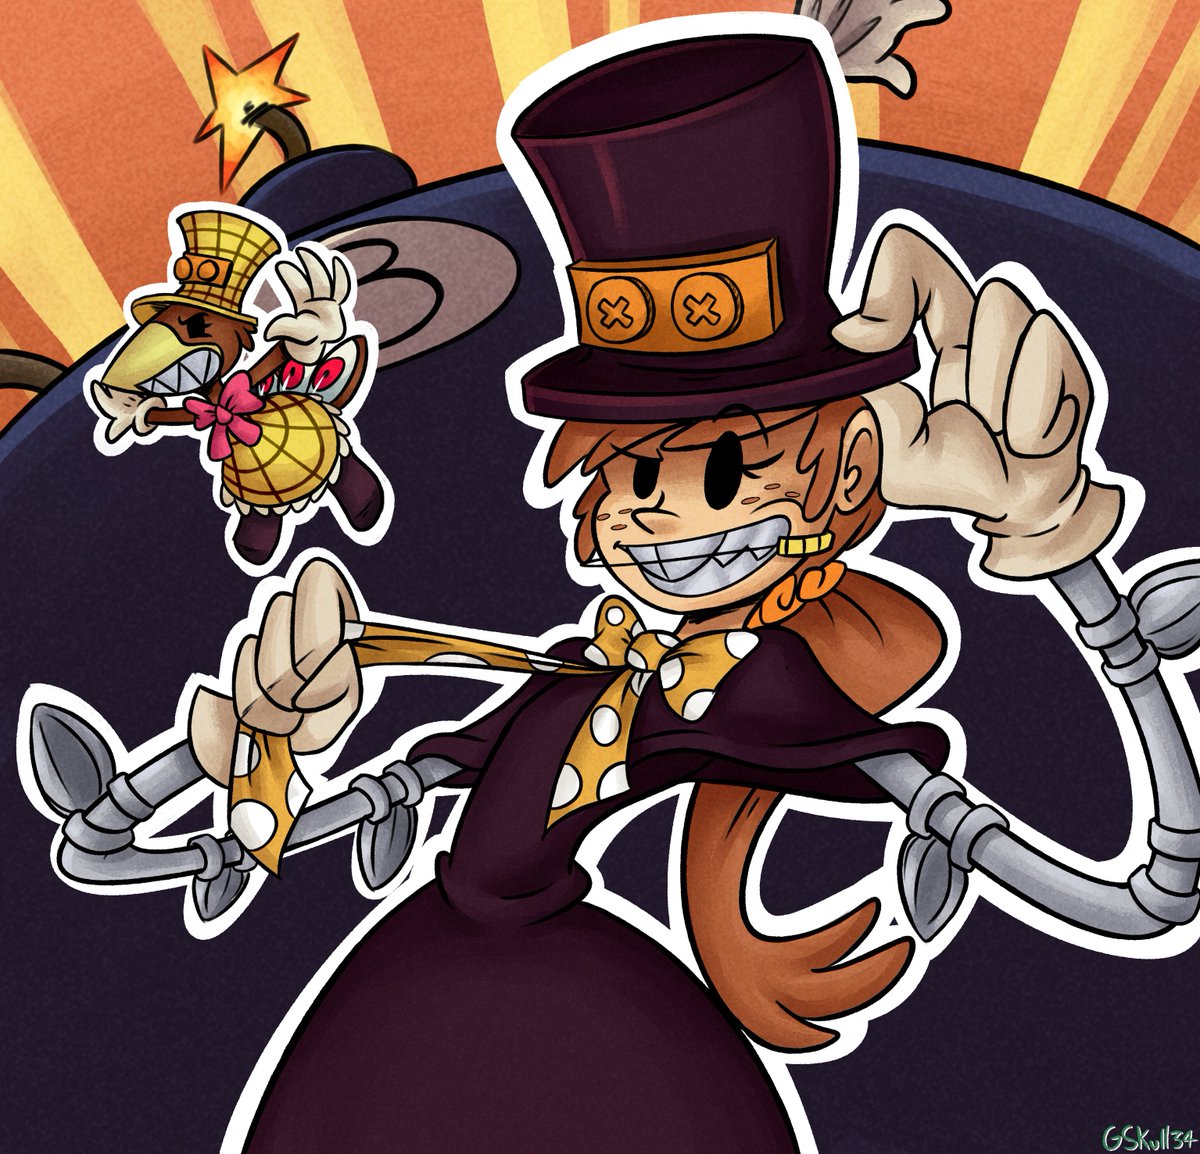 RT @GreenSkull34: Liby as Peacock from skullgirls. i like how this one came out.

#Sinkids https://t.co/ycJgLjE1hv